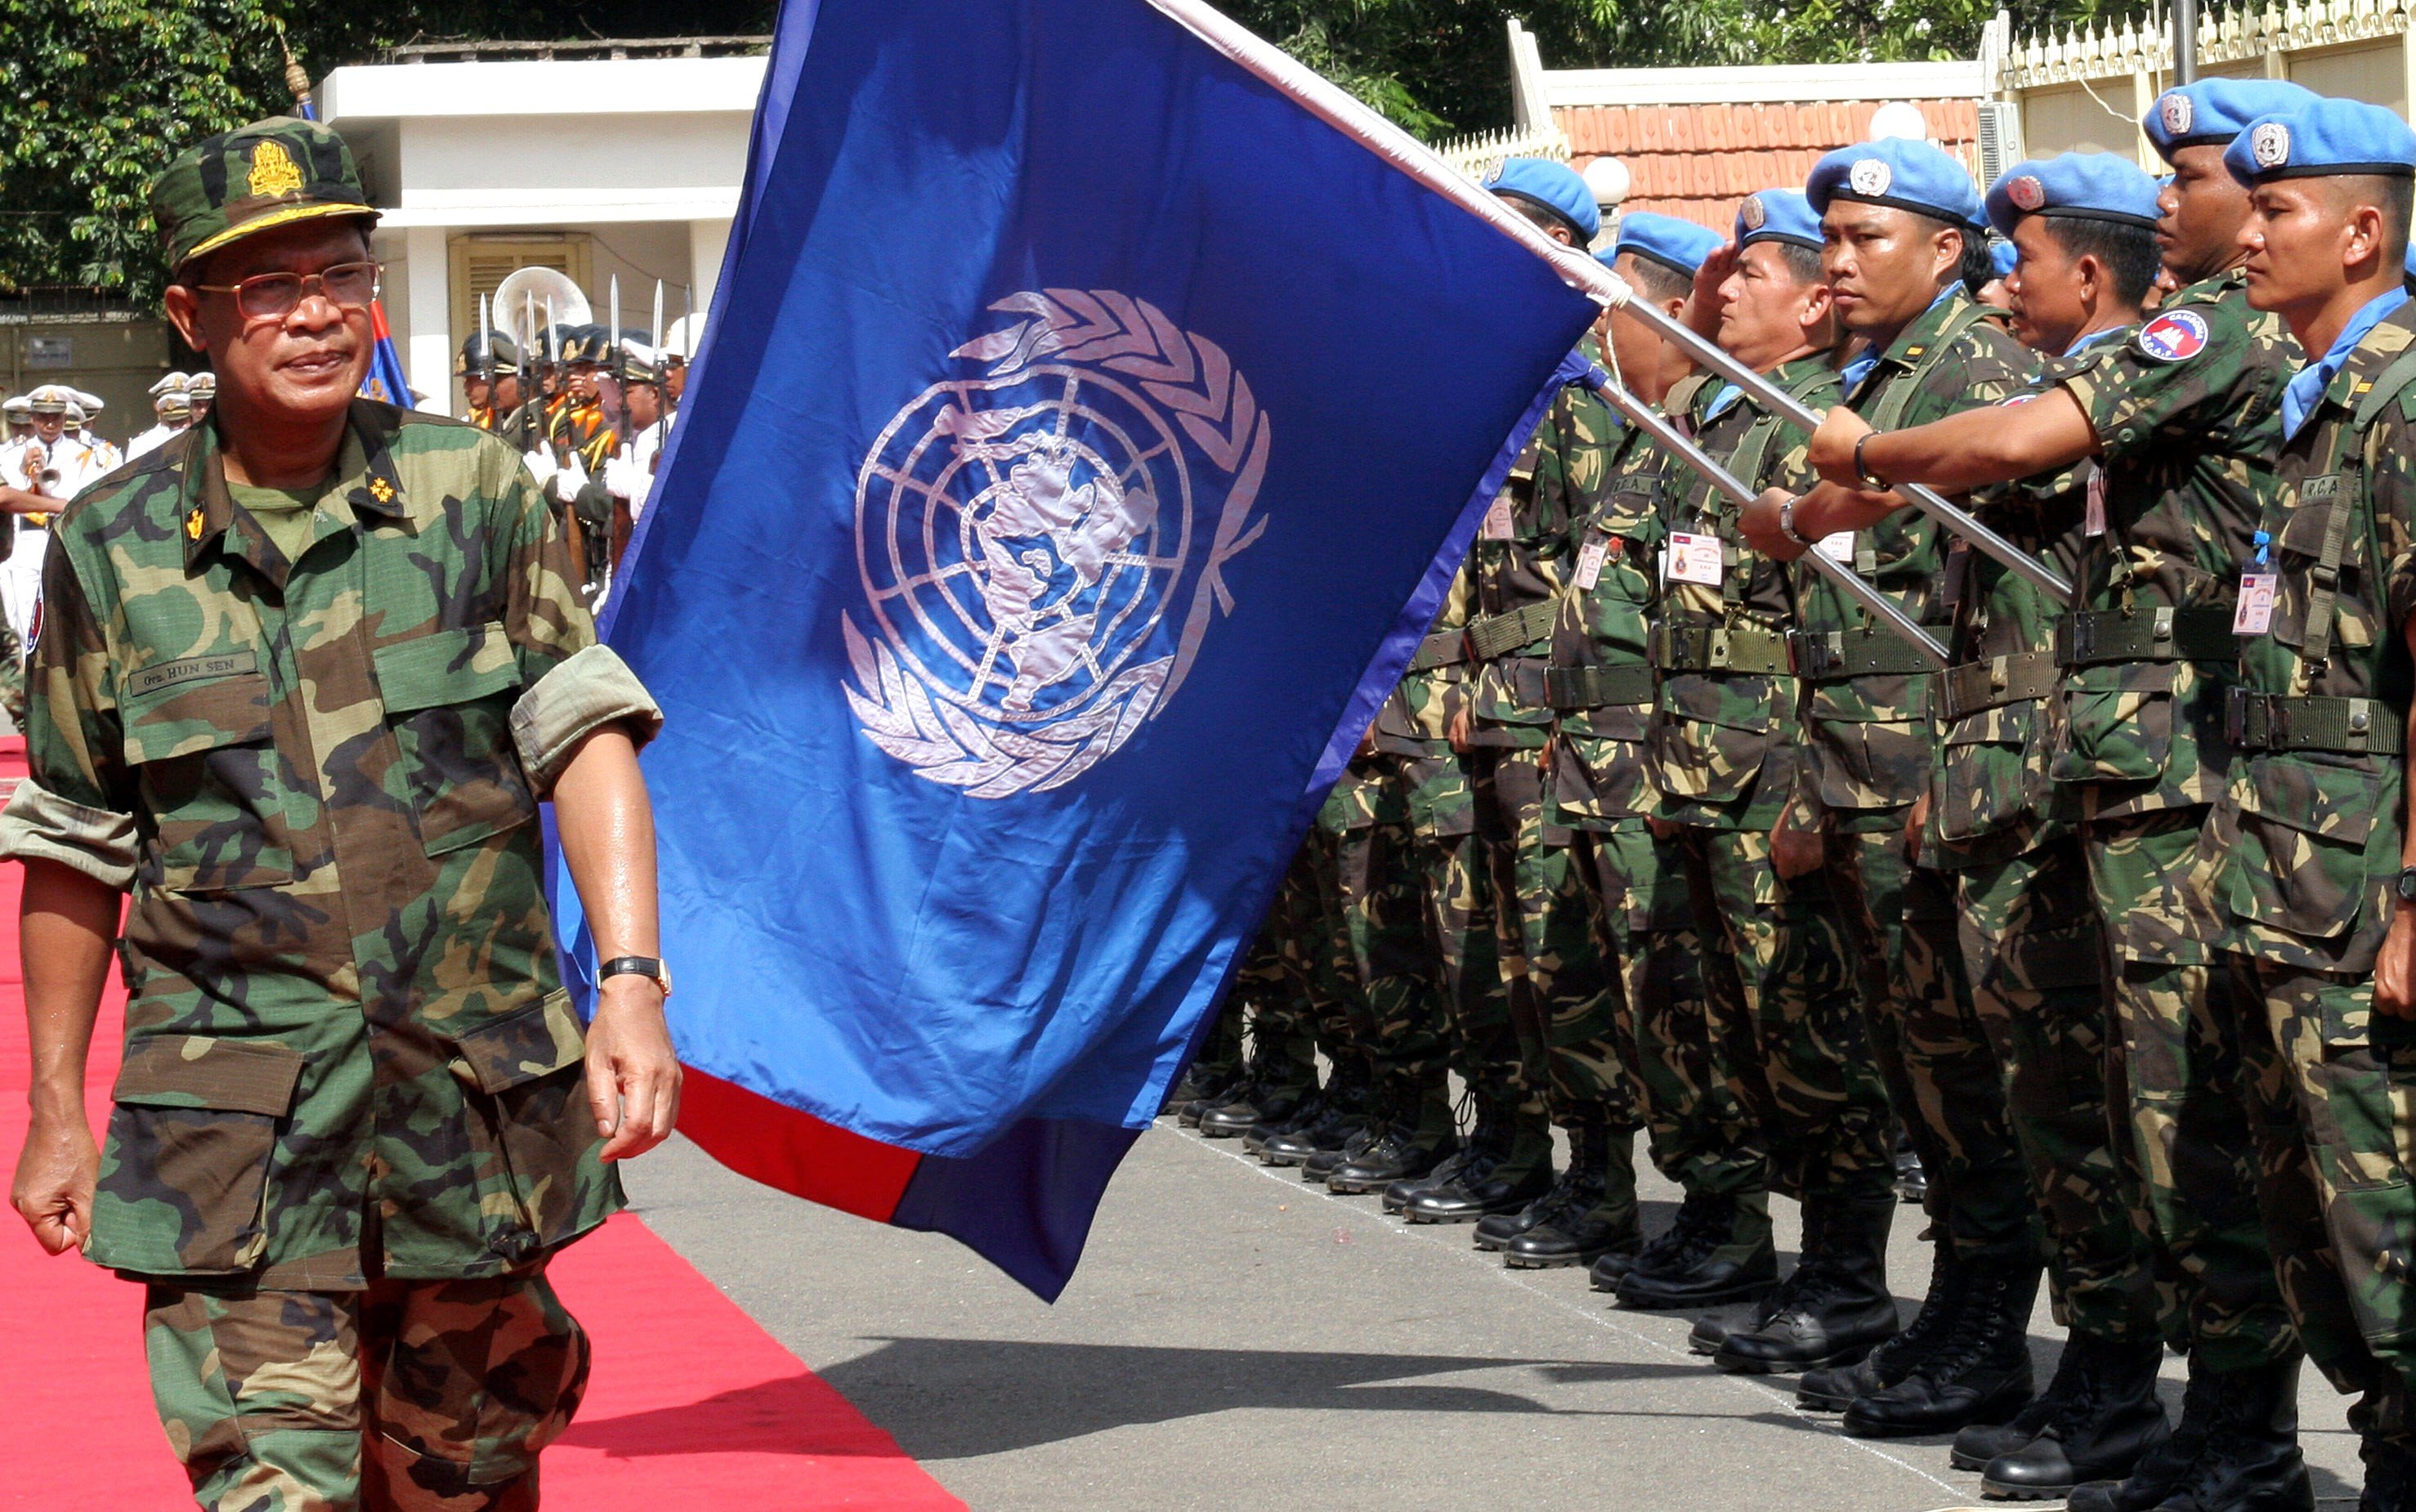 Fuelled by a sense of debt from its civil war, Cambodia makes an outsized contribution to UN peacekeeping. Some of its forces have paid the ultimate price – while those who return must deal with the trauma alone